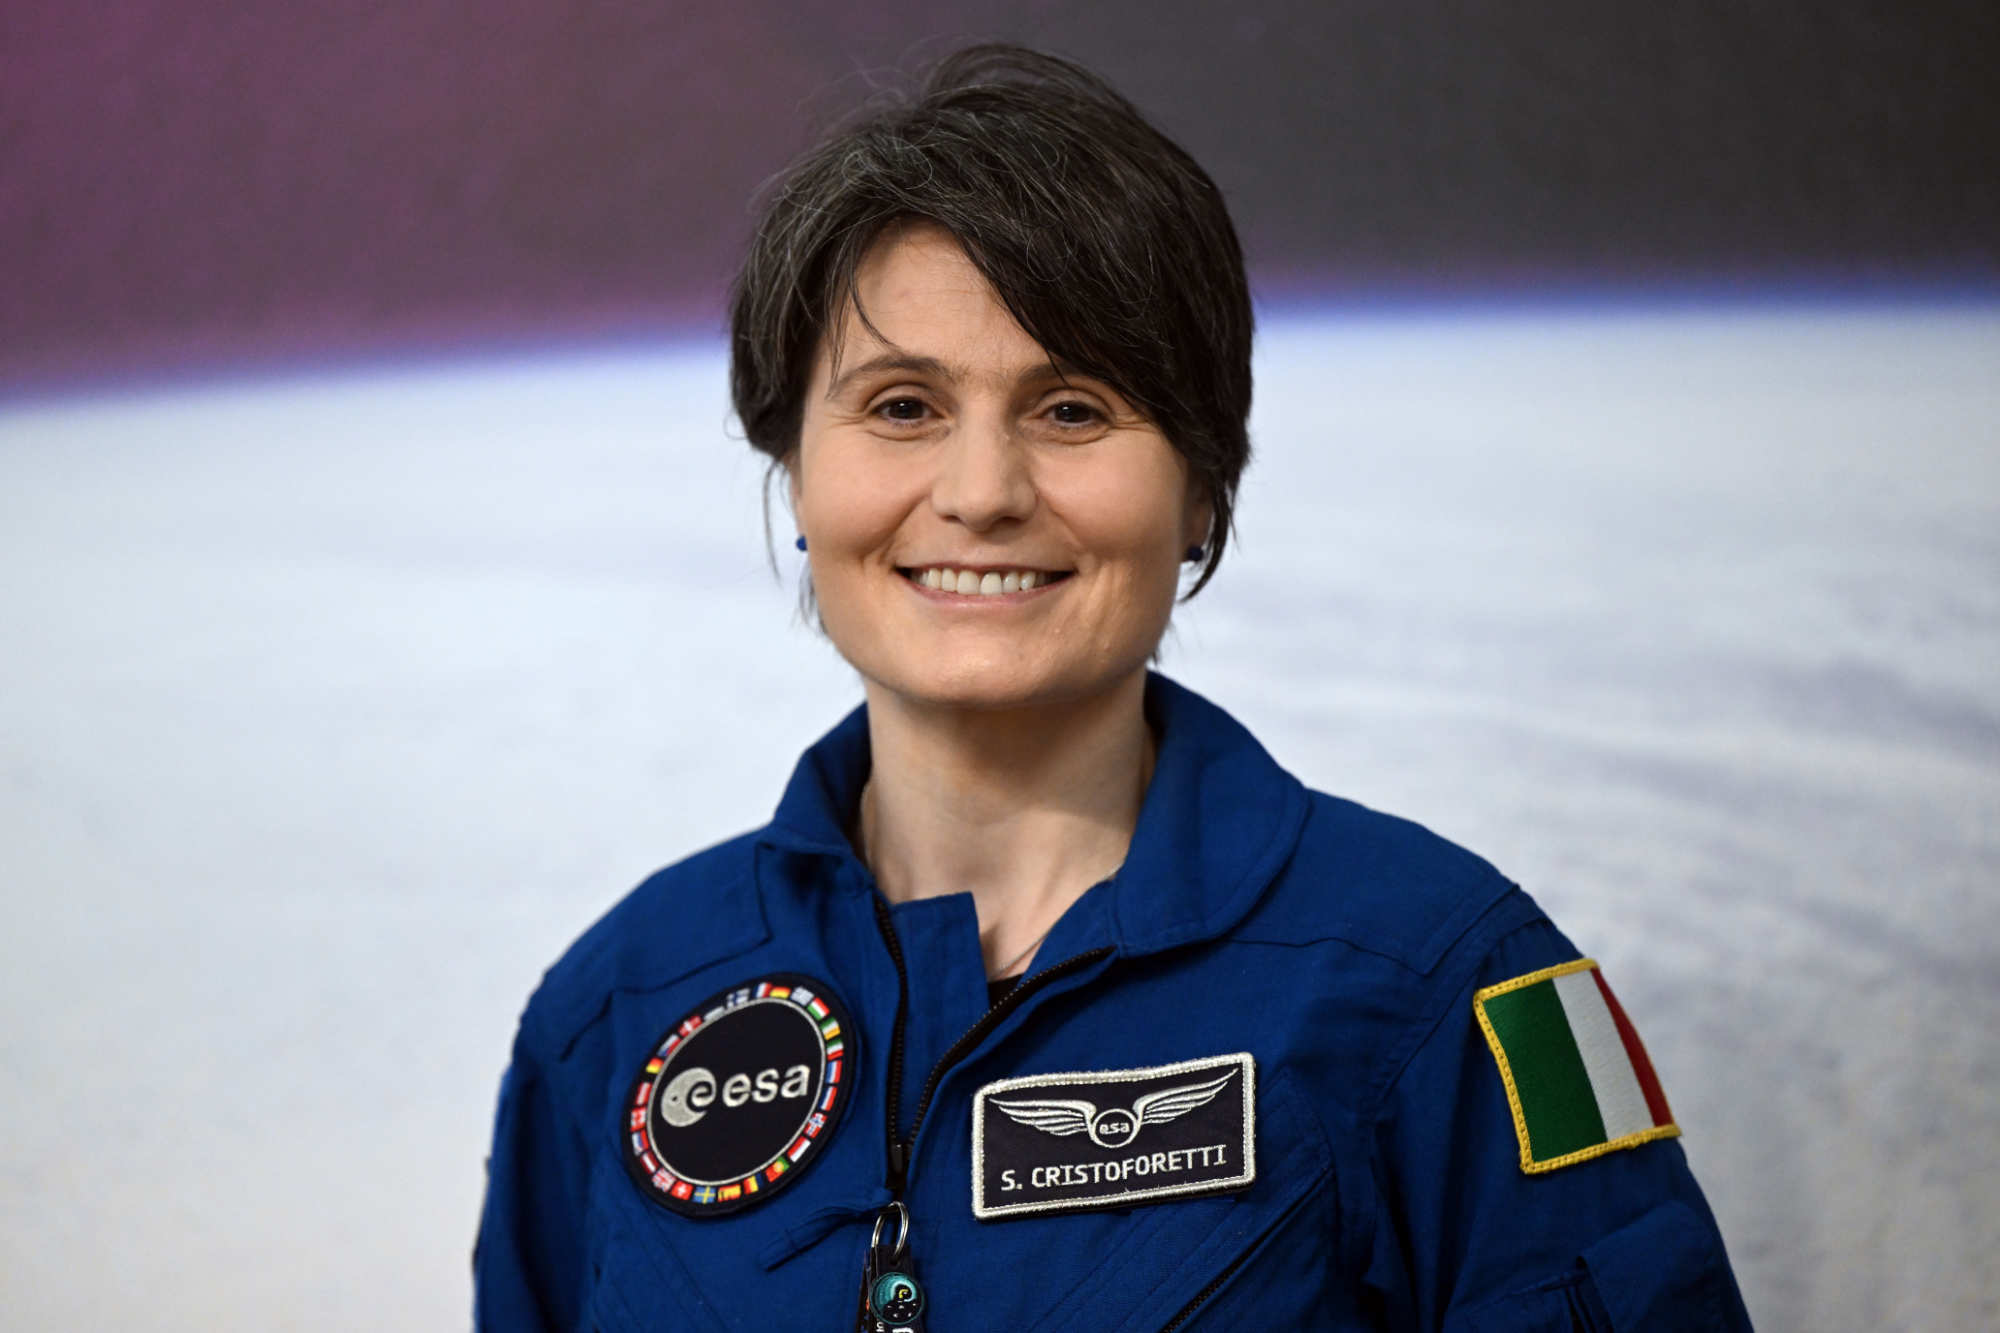 Space researcher from Germany I Samantha Cristoforetti